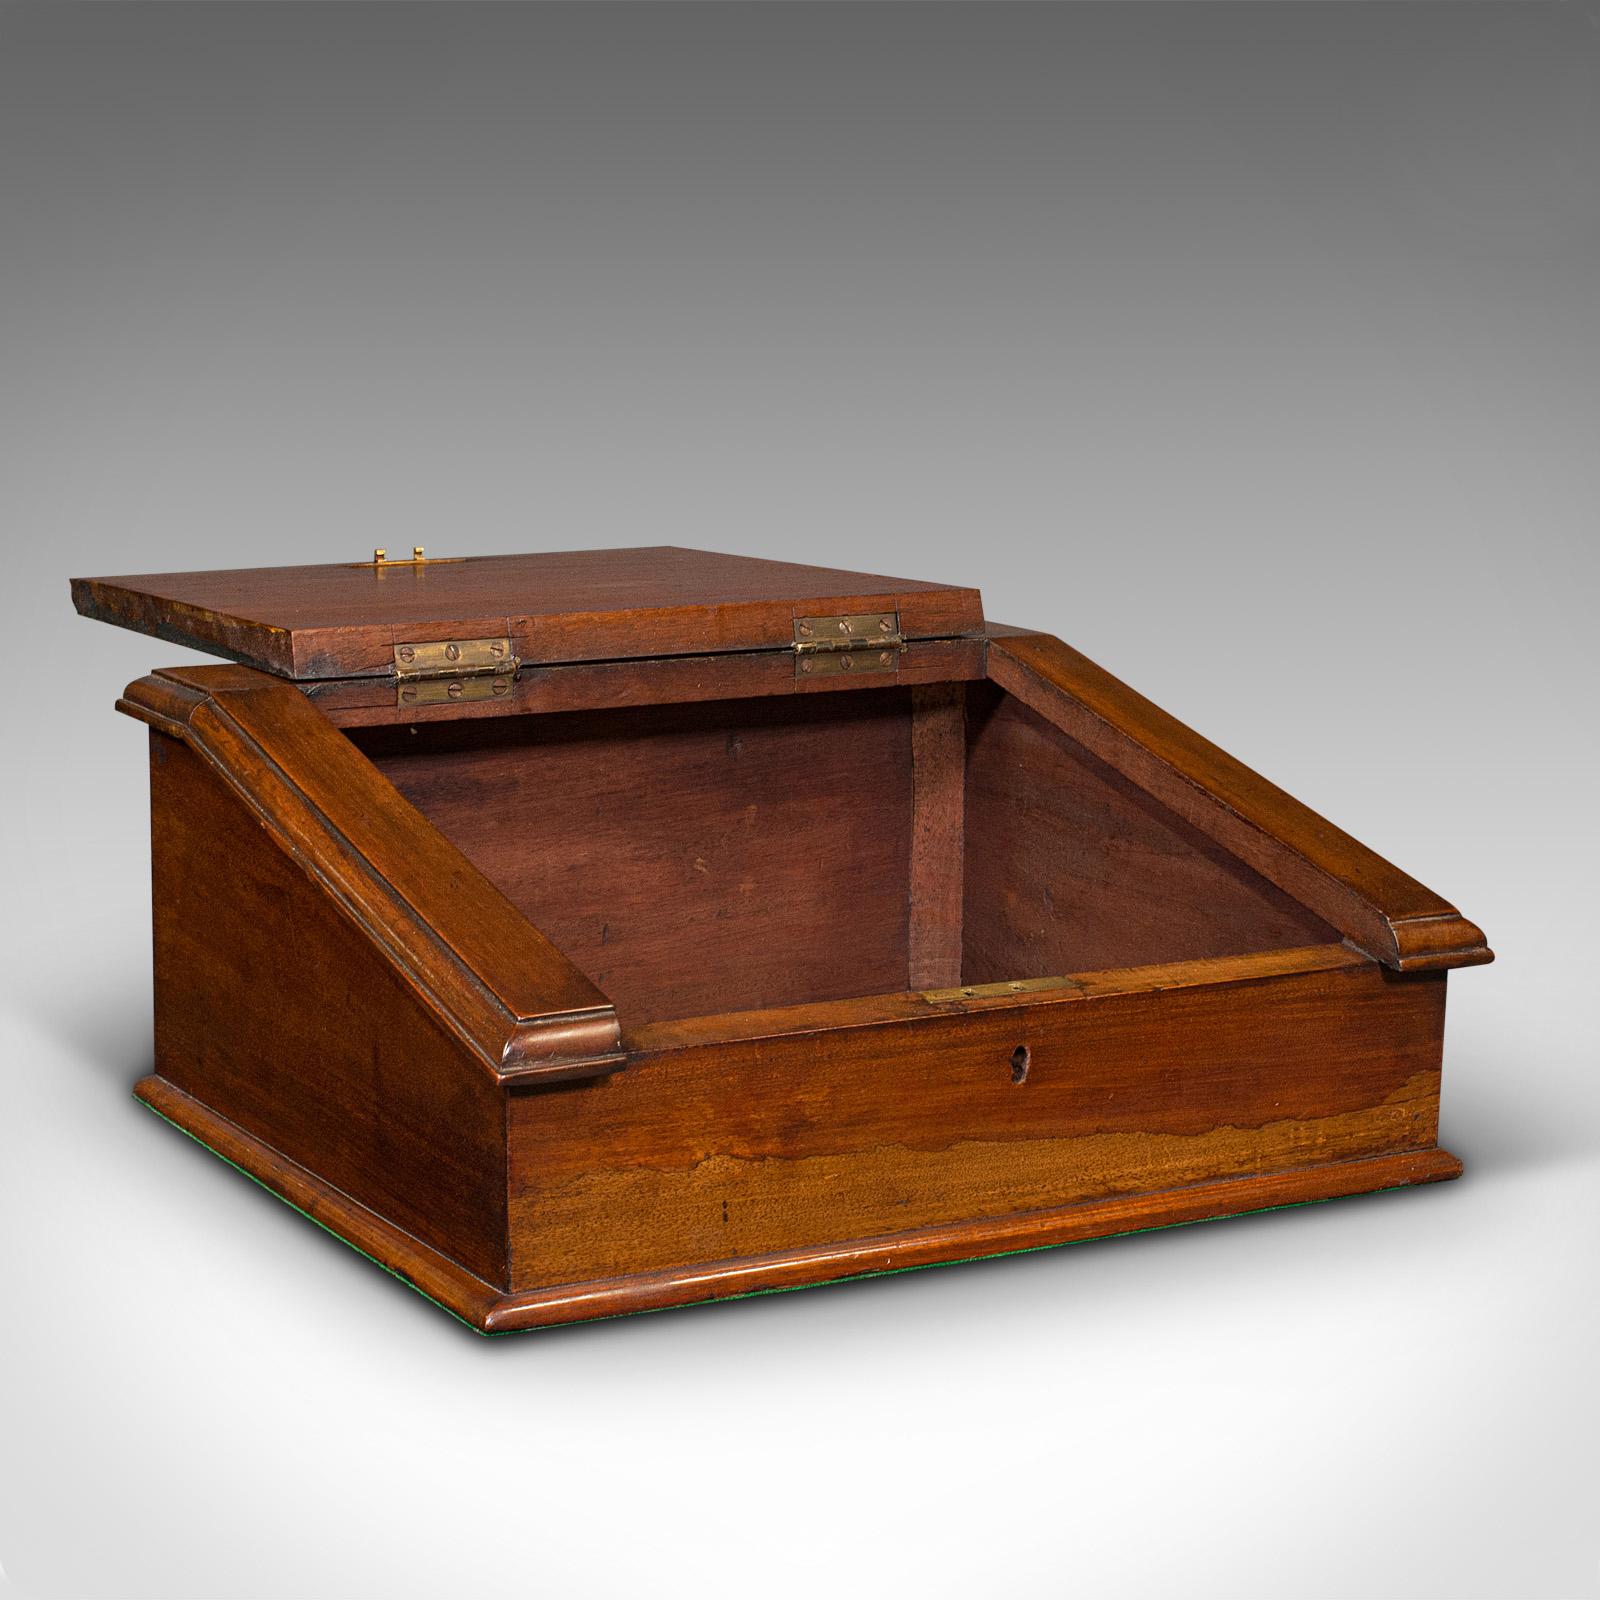 This is an antique hotel reception correspondence box. An English, mahogany writing slope, dating to the Edwardian period, circa 1910.

Graced with wonderful Art Nouveau overtones and of appealing form
Displays a desirable aged patina and in very